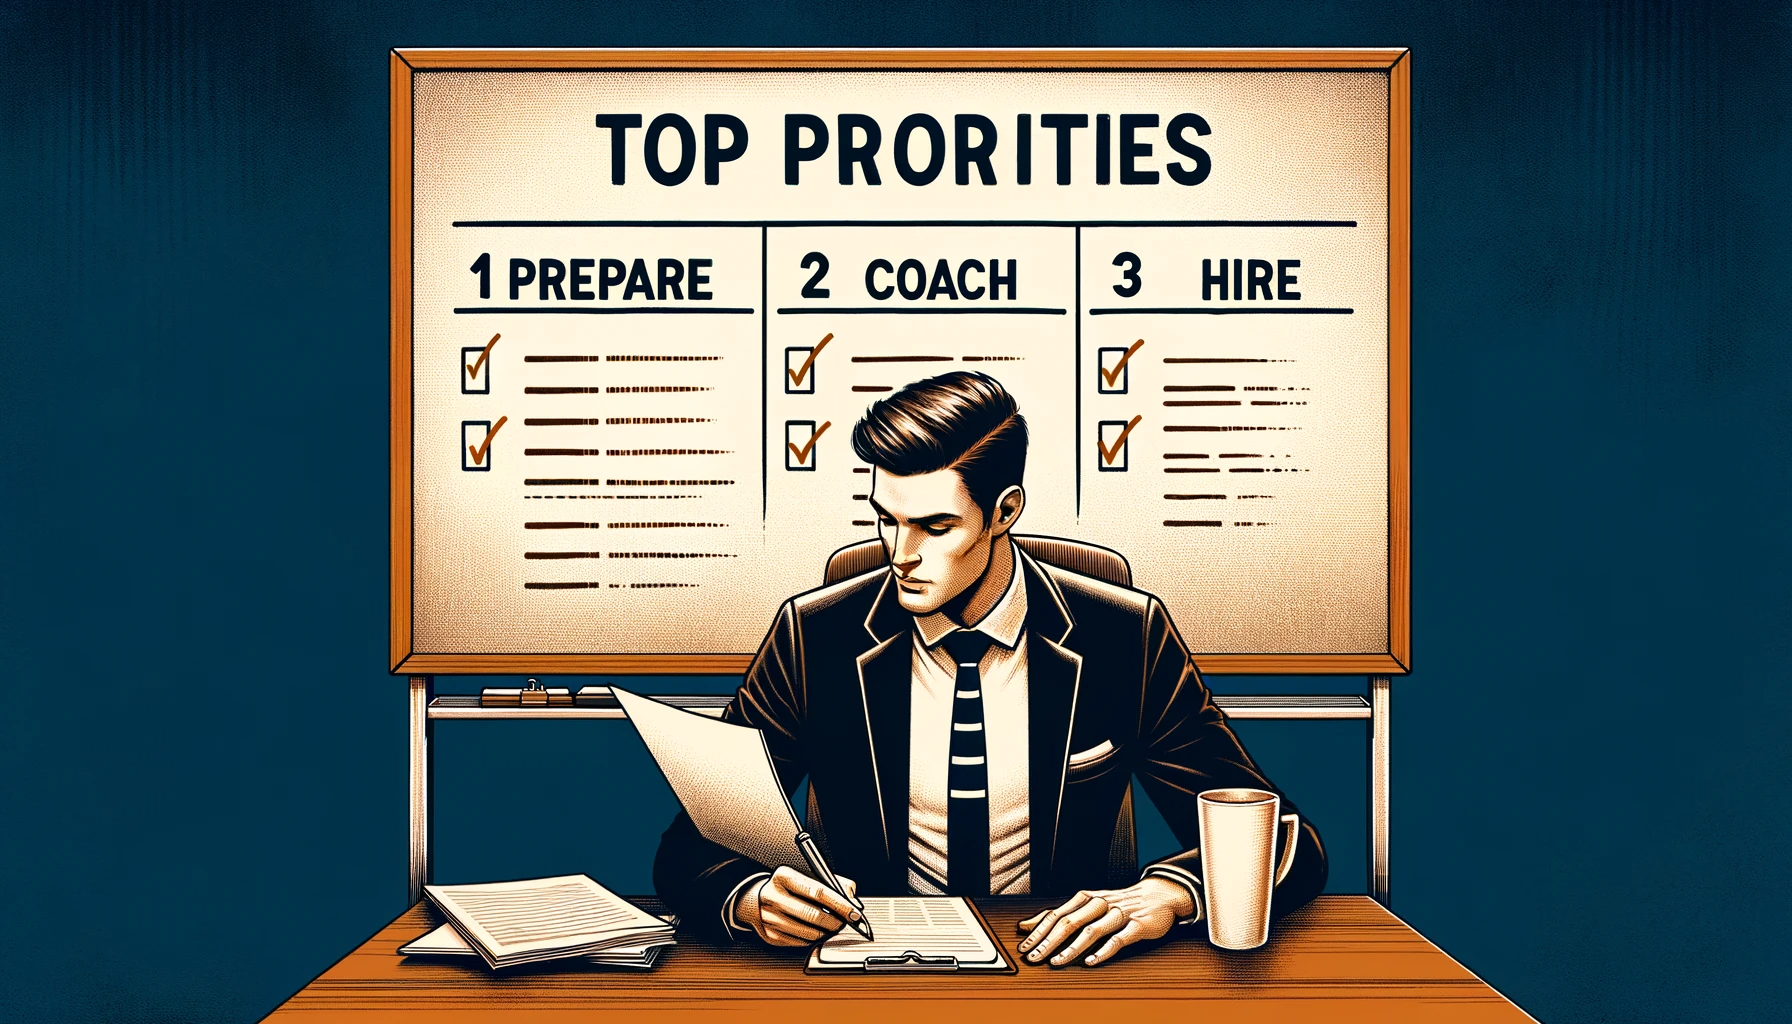 Sales Managers: What Are Your Priorities?